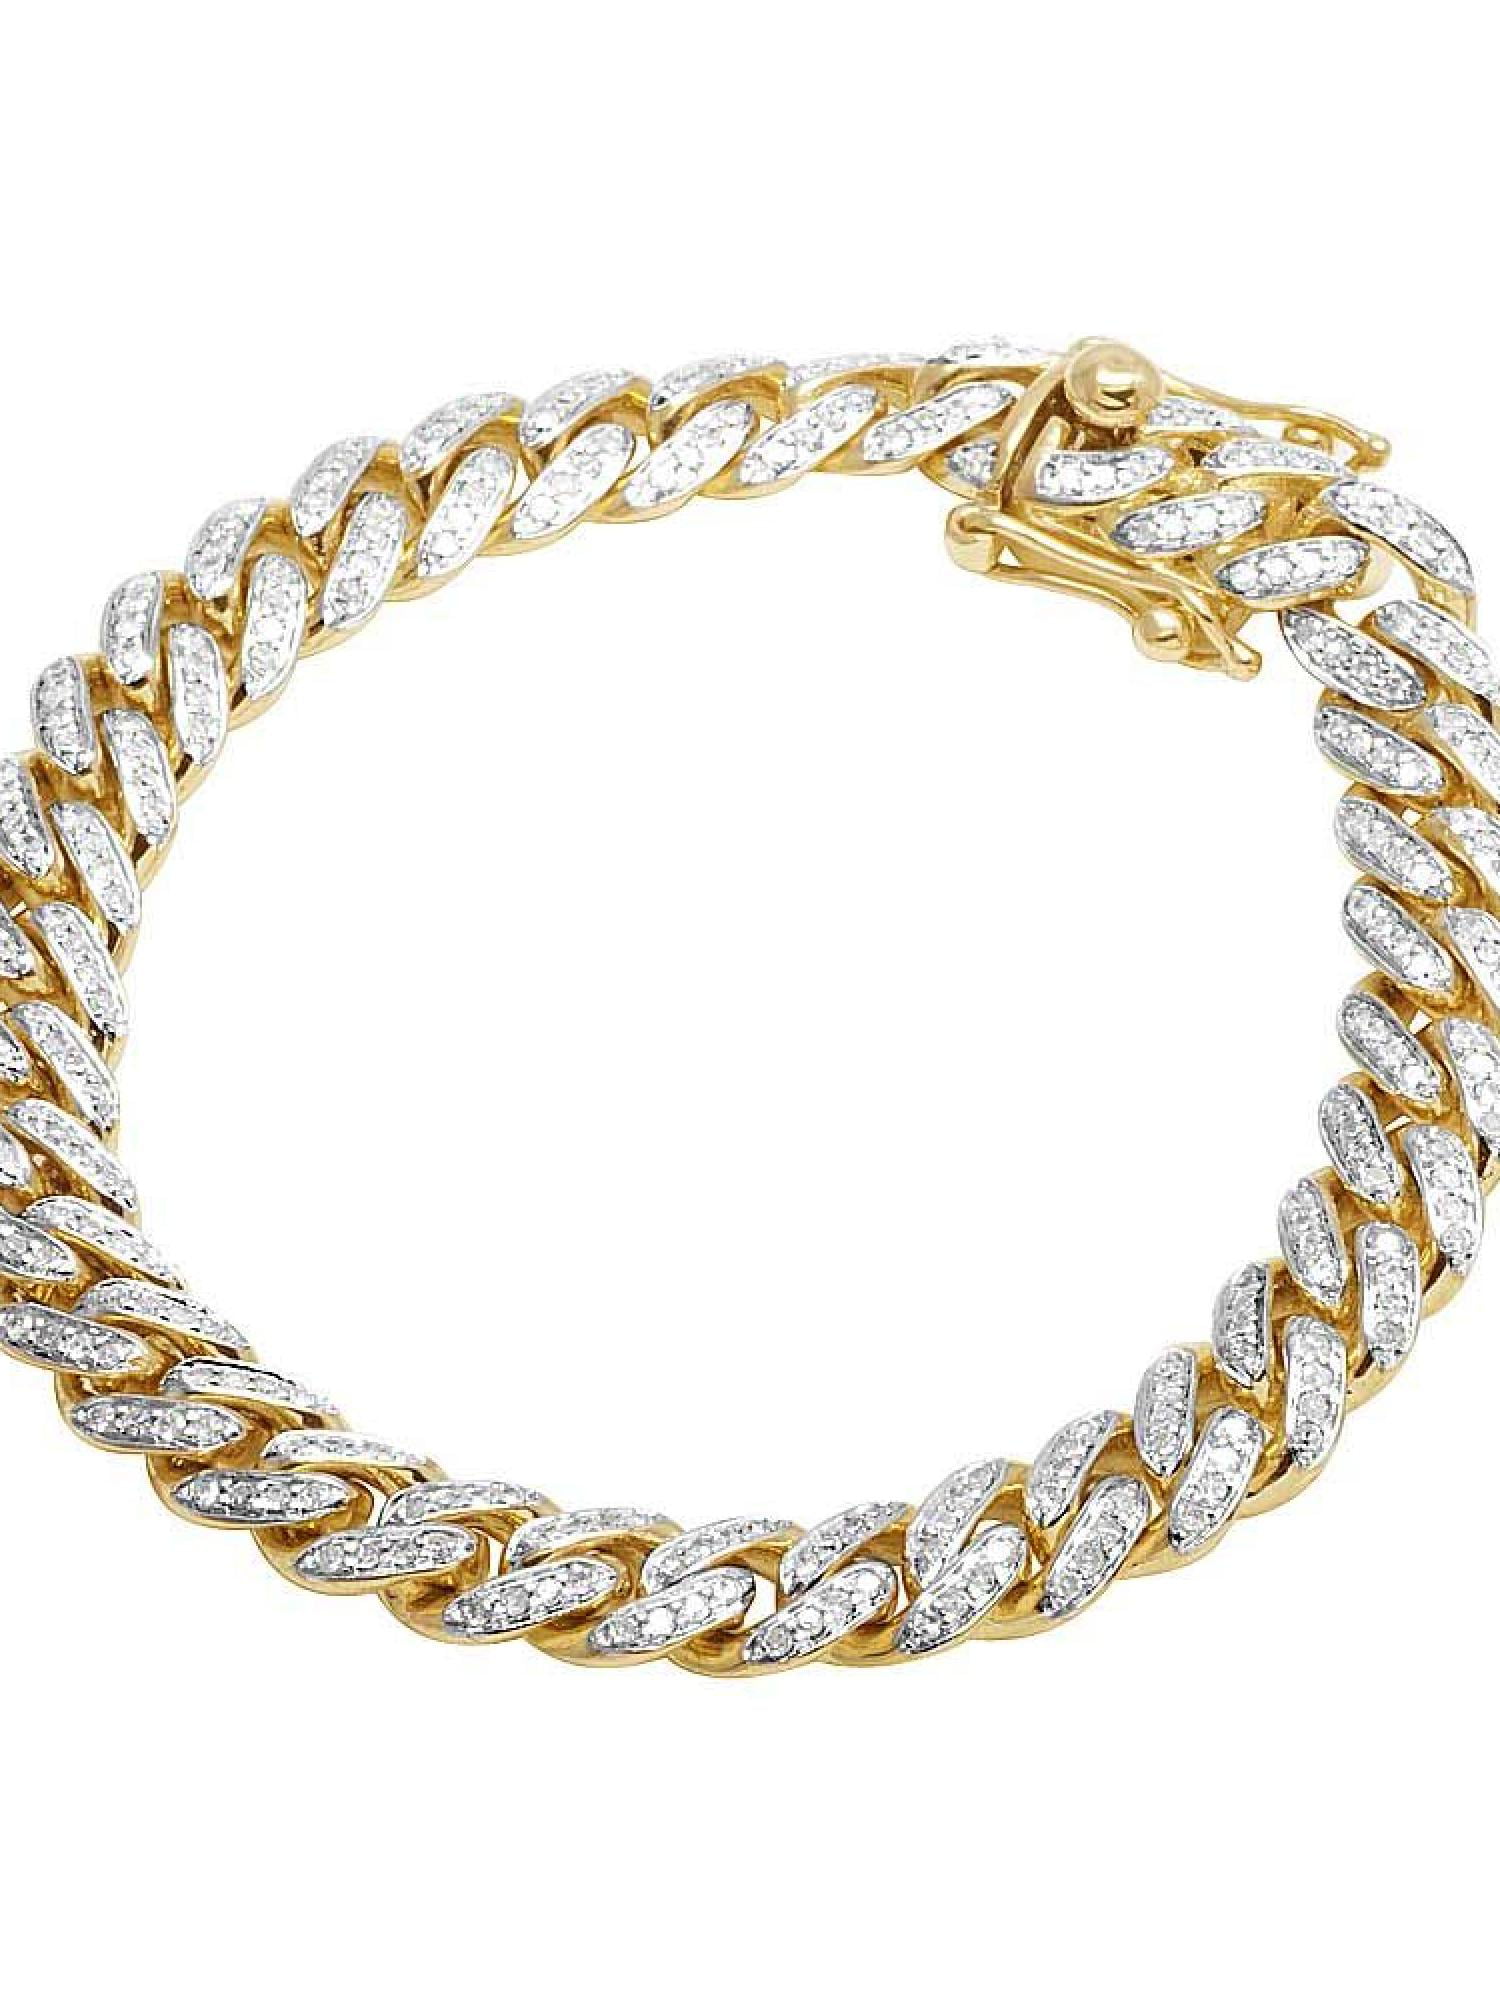 24" Inch,Men's Women,Rope,Cuban Real 10k Yellow Gold Franco Chain Necklace 16" 